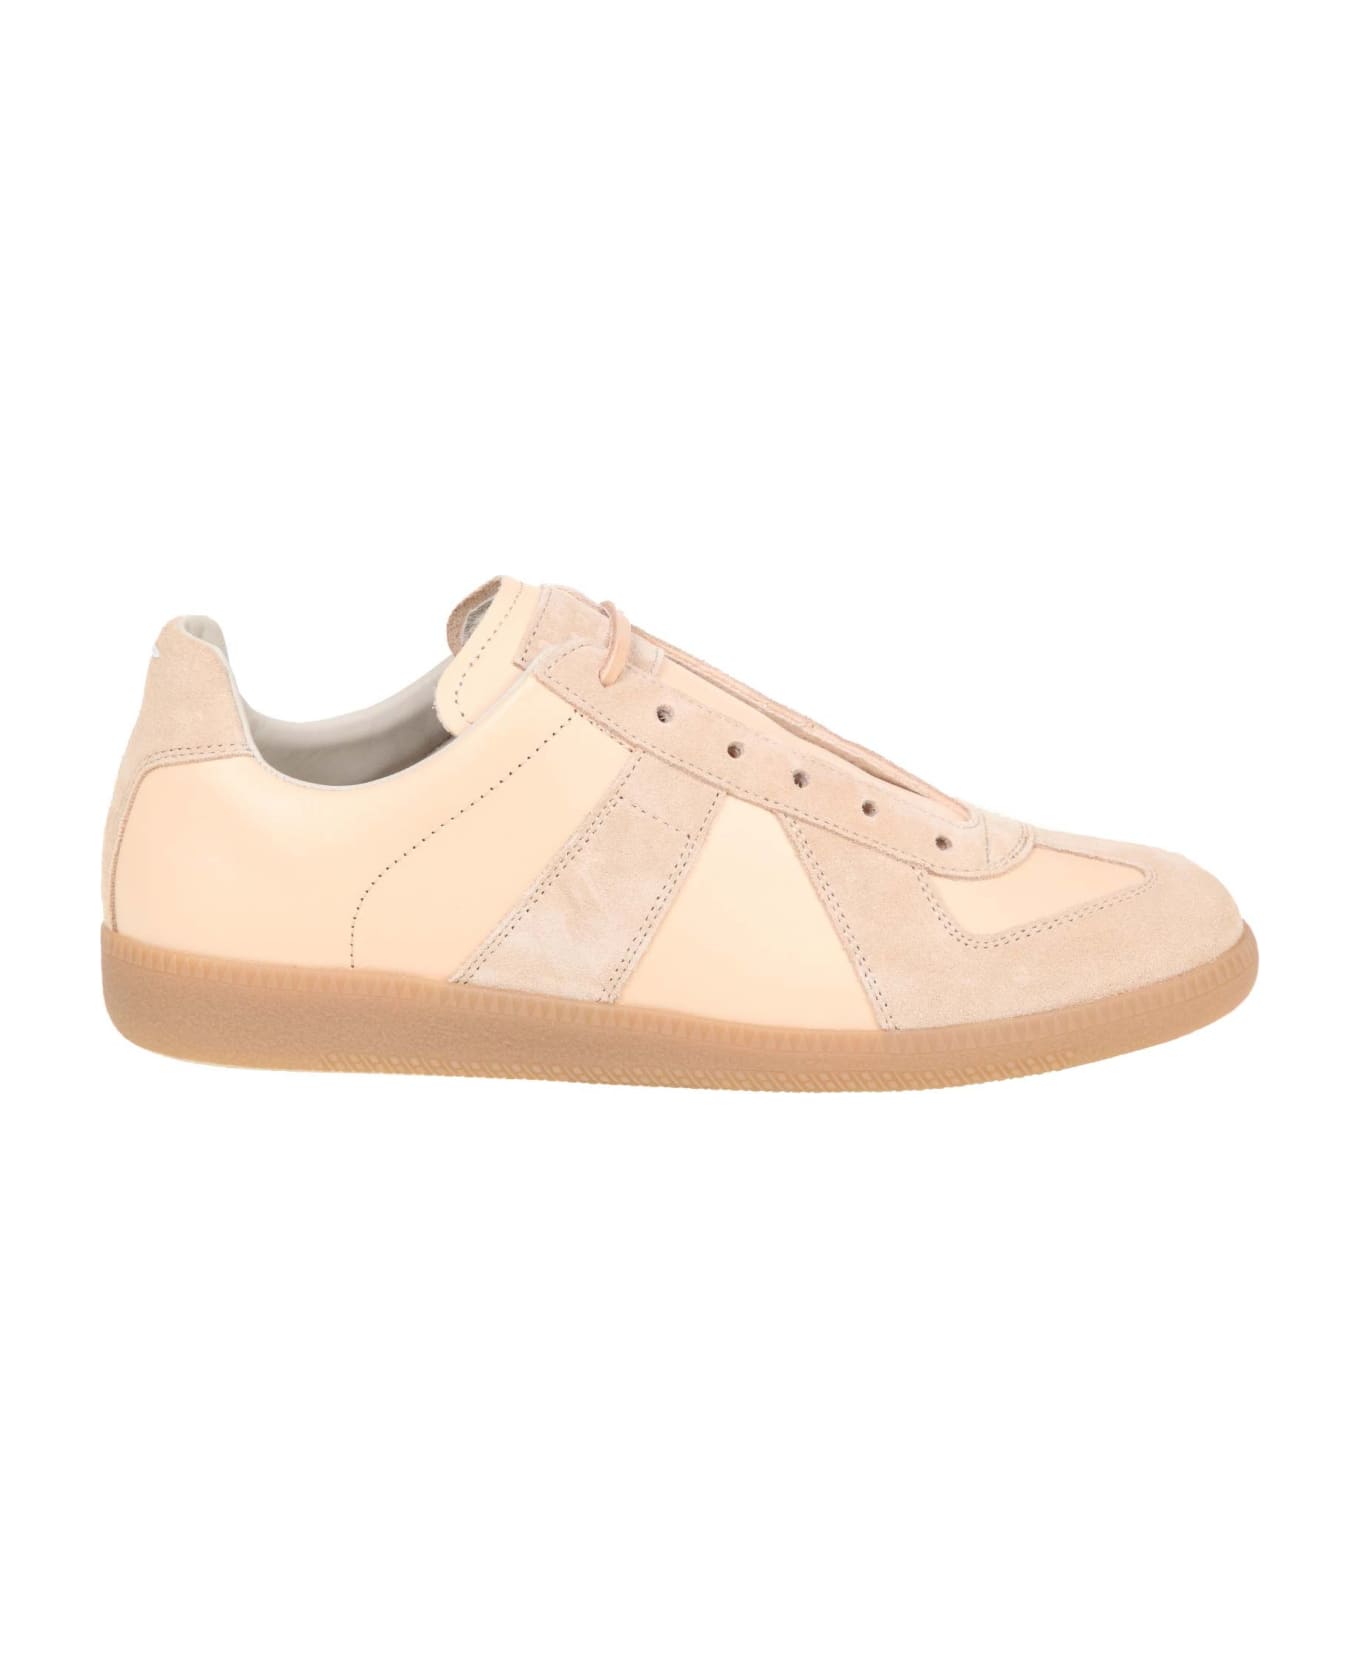 Maison Margiela Sneakers Replica In Leather And Suede - BEIGE